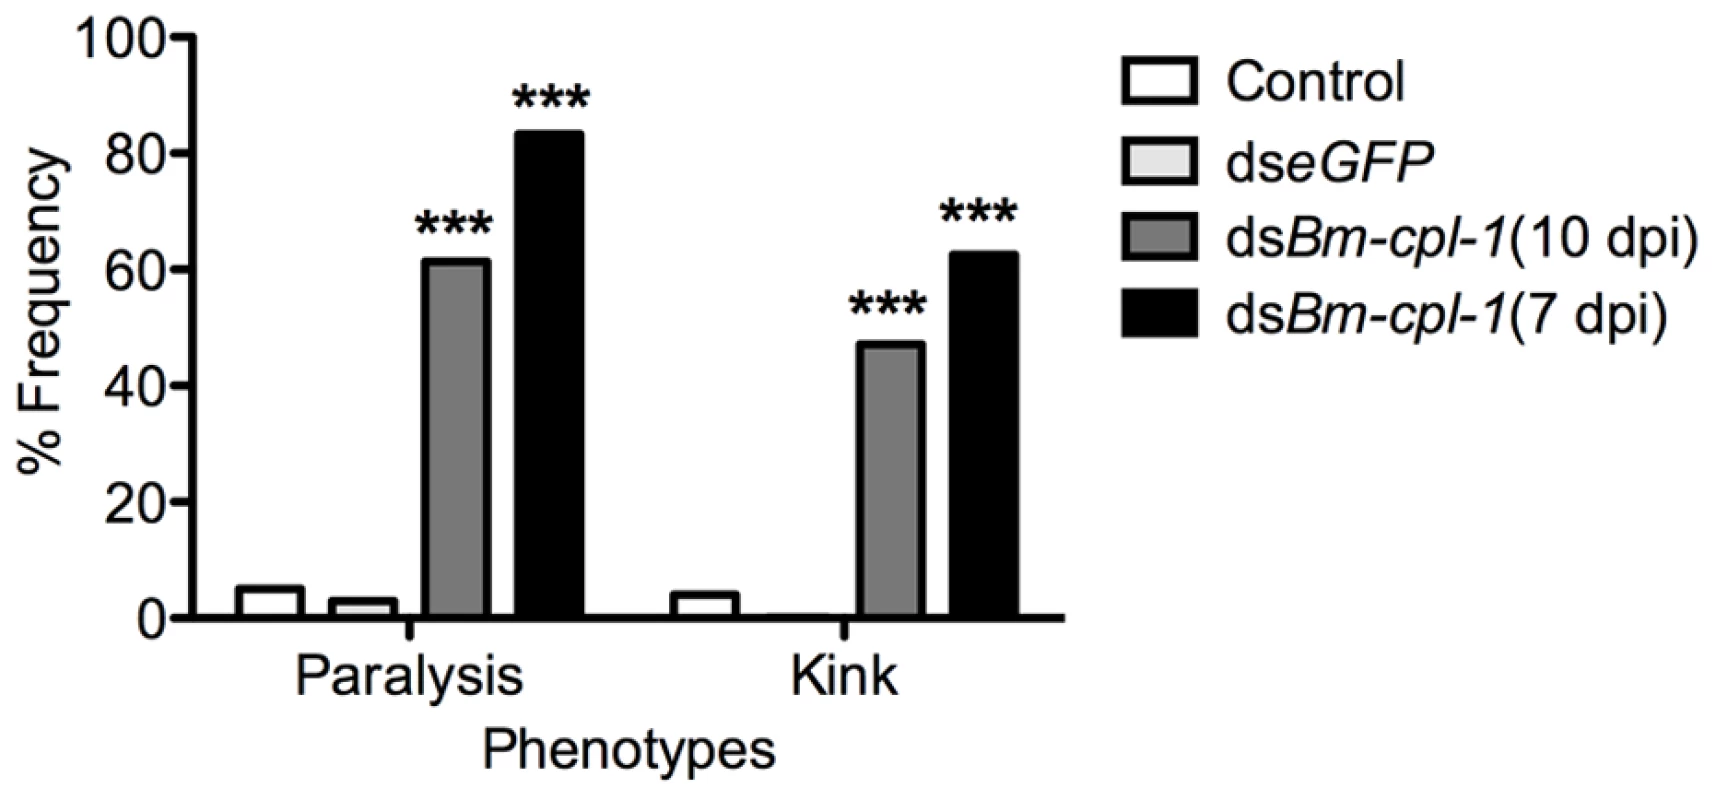 The frequency of caudal paralysis and kinked posture of dsRNA <i>Bm-cpl-1</i>-exposed <i>B. malayi</i>.